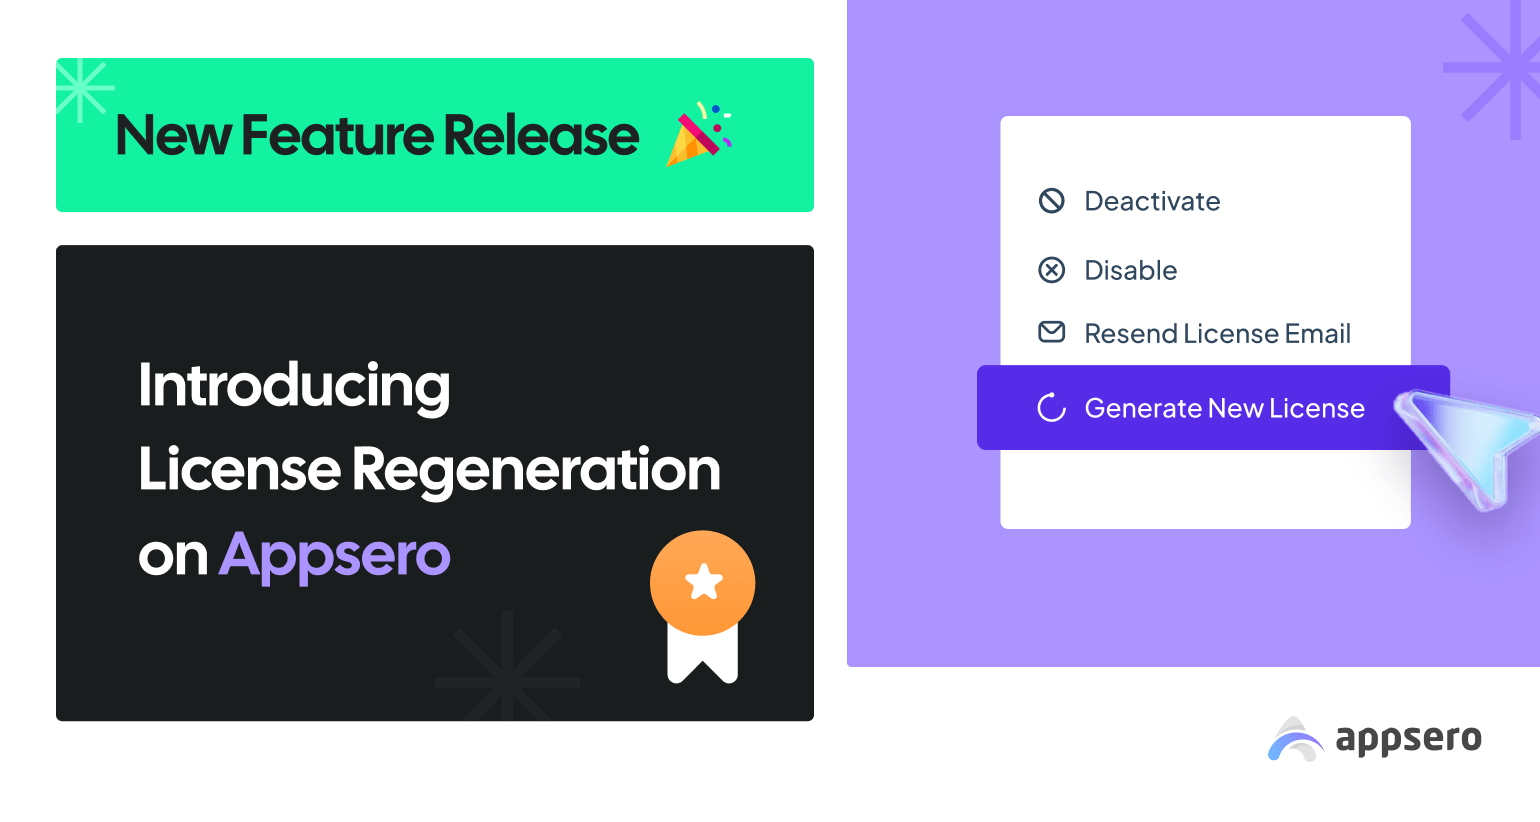 New Feature Release: Introducing License Regeneration on Appsero 🎉